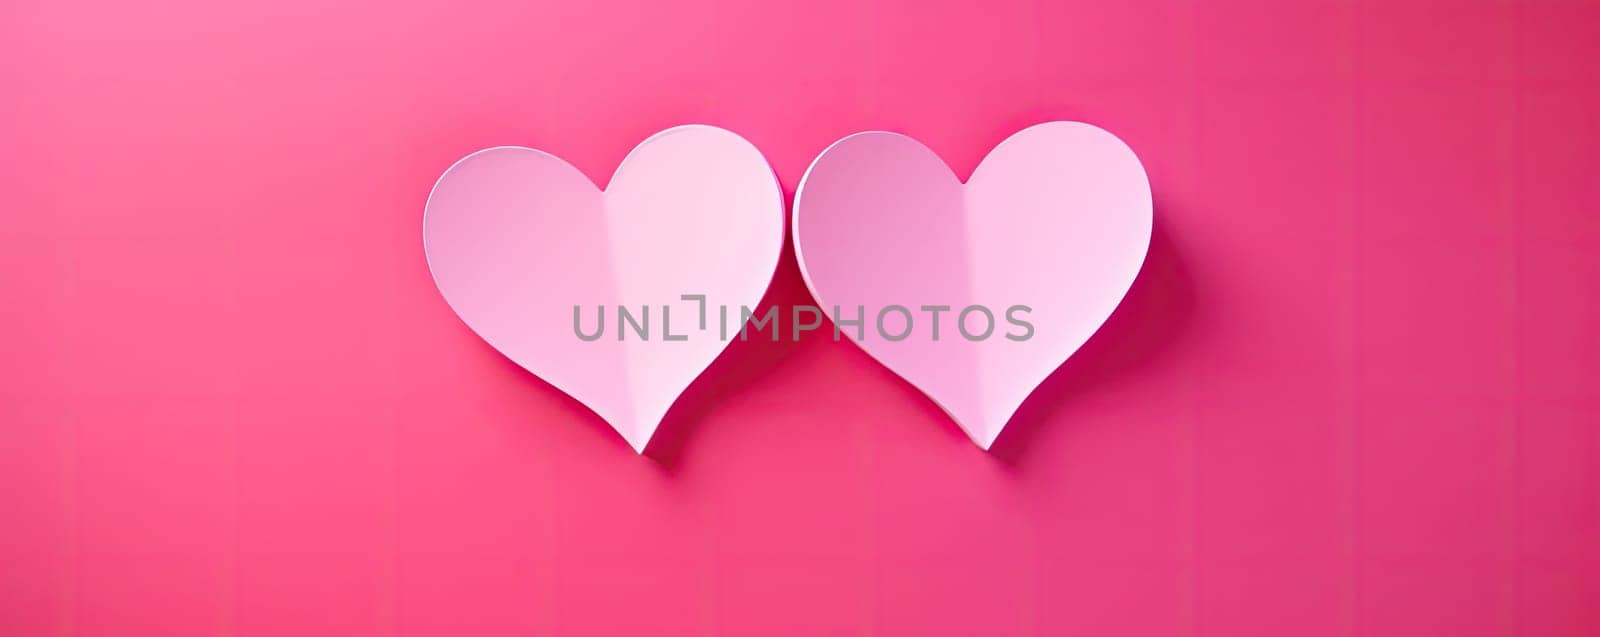 Pink hearts on a bright pink background, a symbol of love and romance